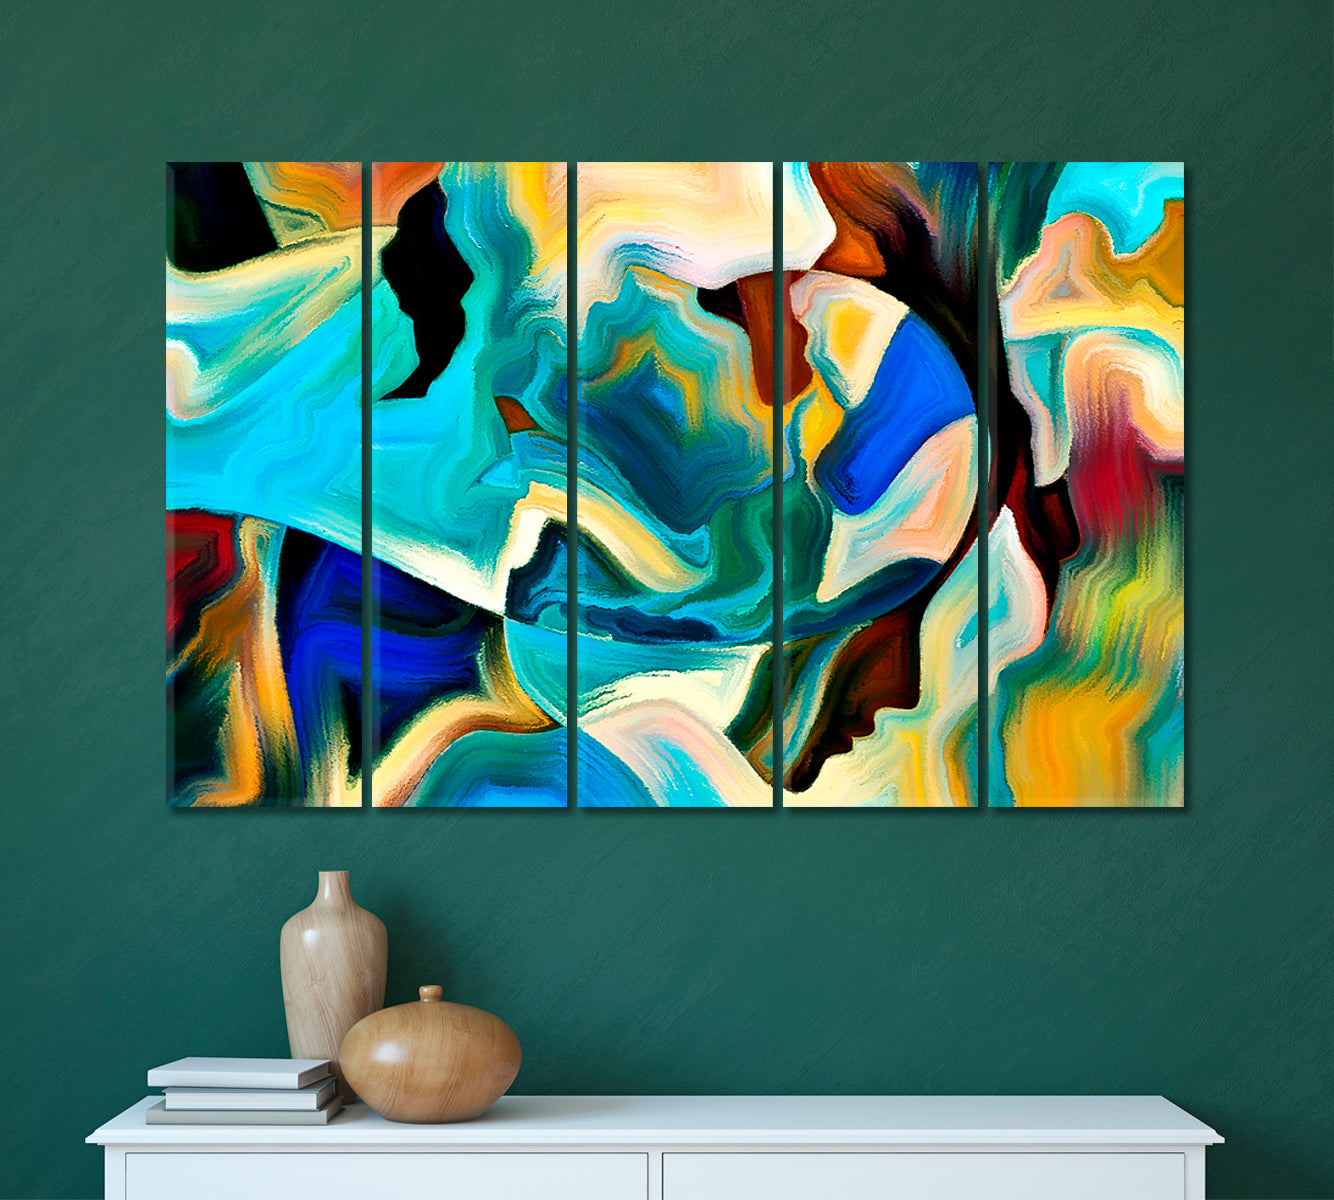 Sacred Reality Abstraction, Human Profiles Lines Colors And Shapes Abstract Art Print Artesty 5 panels 36" x 24" 